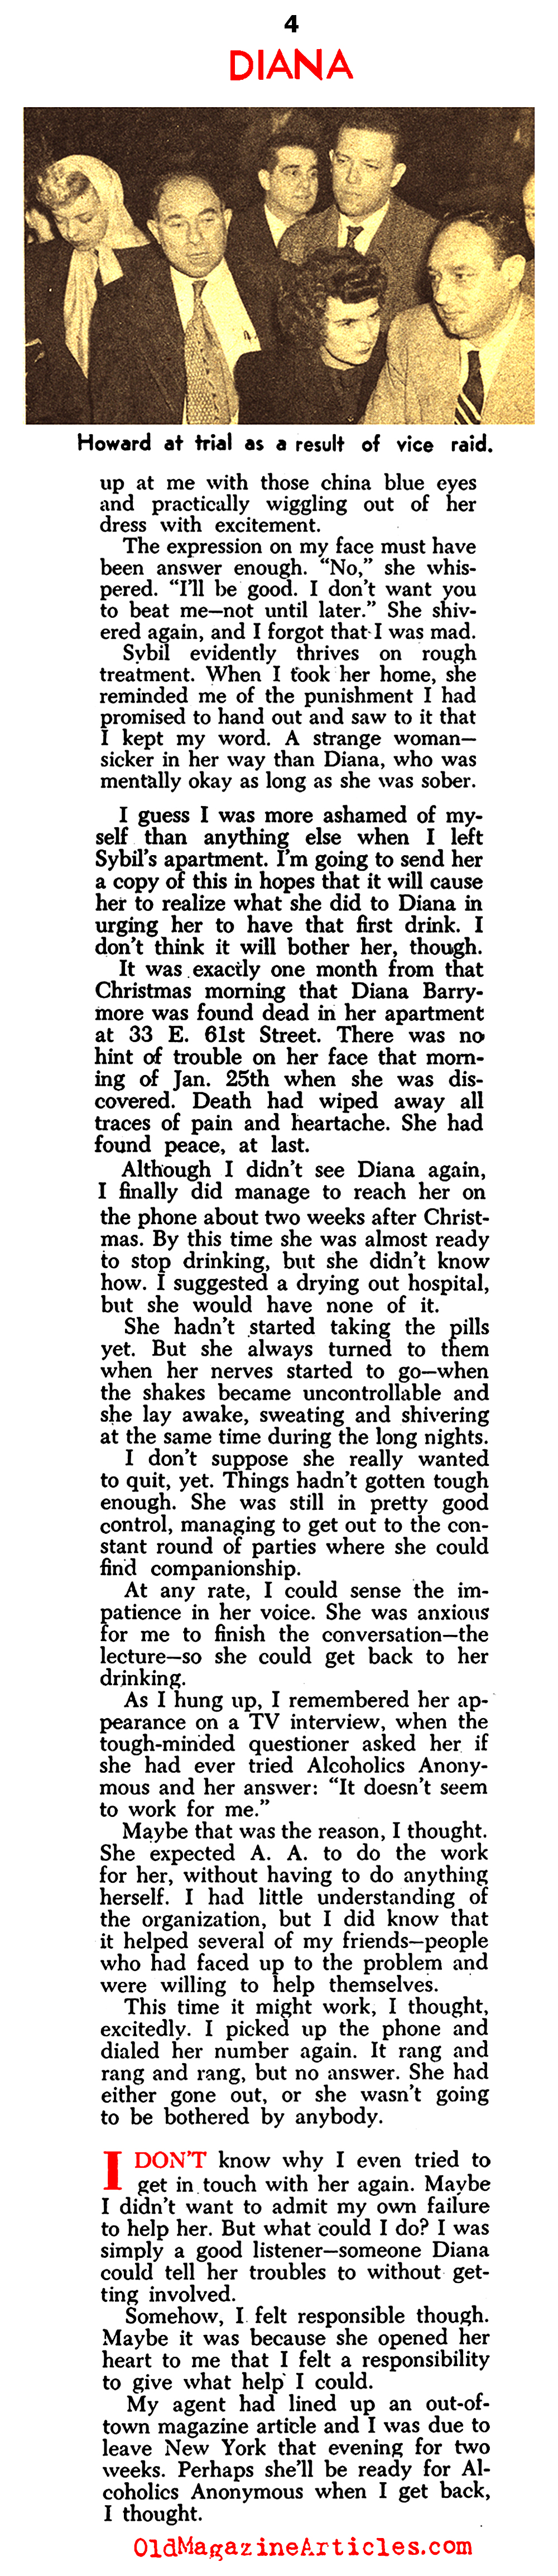 The Death of Diana Barrymore<BR> (On the QT, 1960)